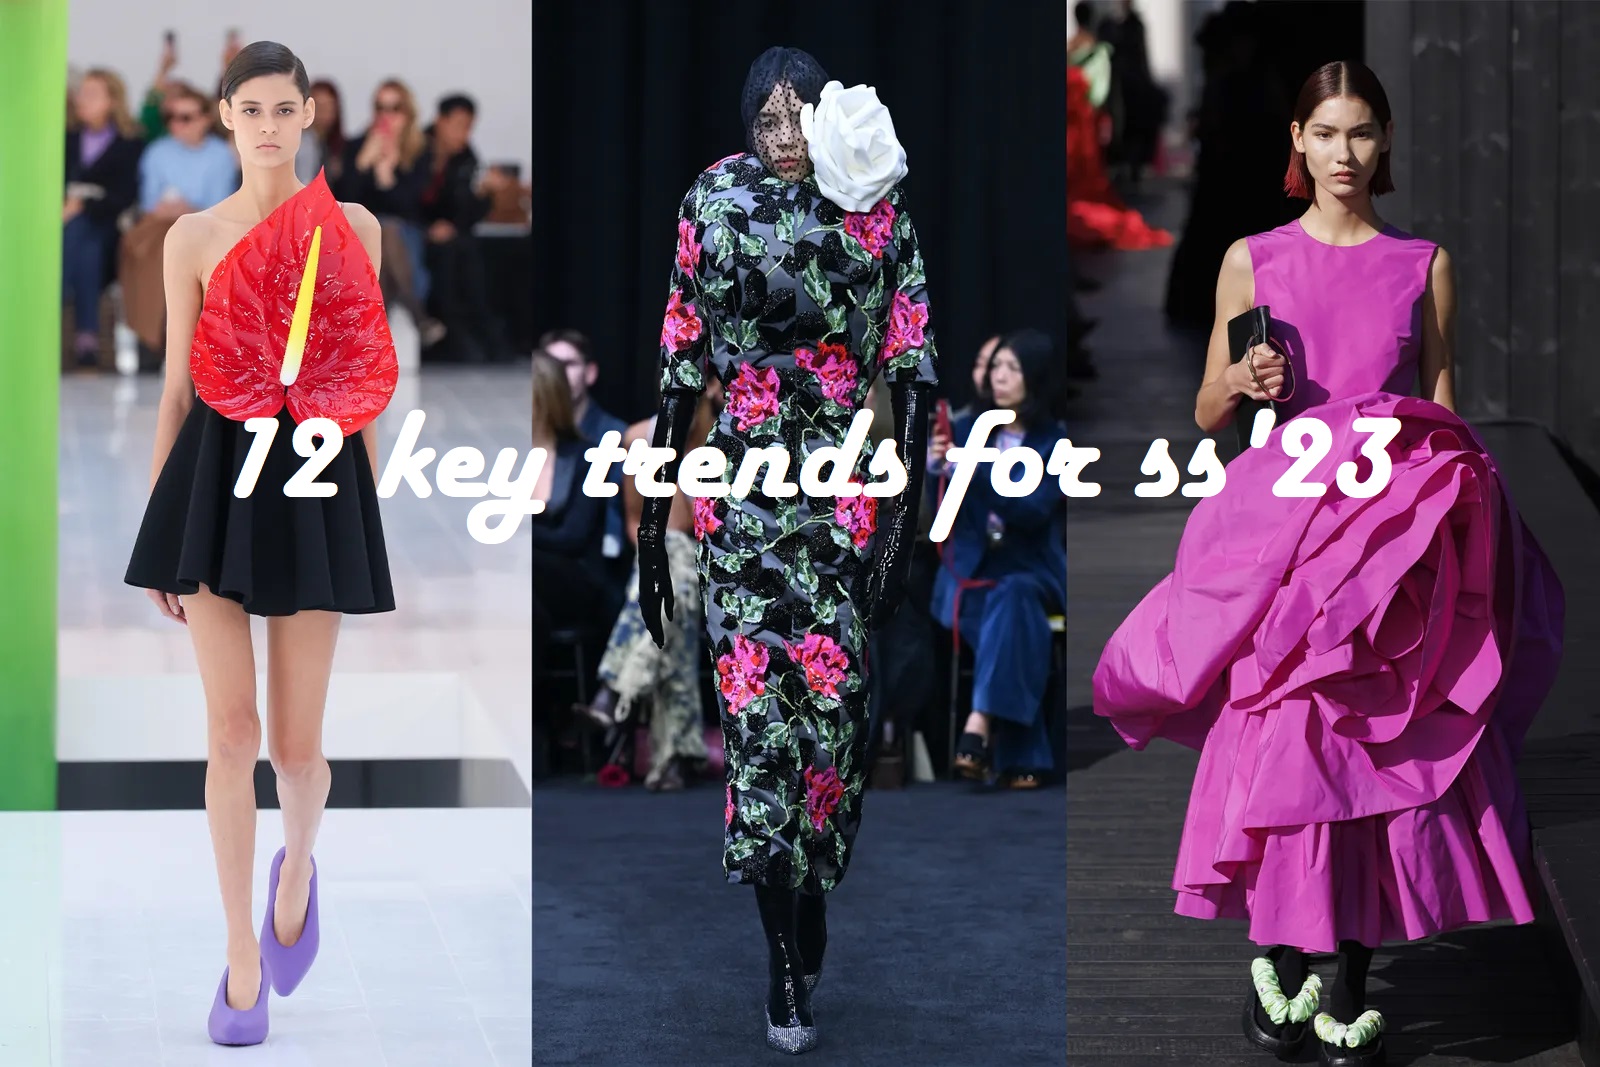 THE BIGGEST FASHION TRENDS FOR SPRING